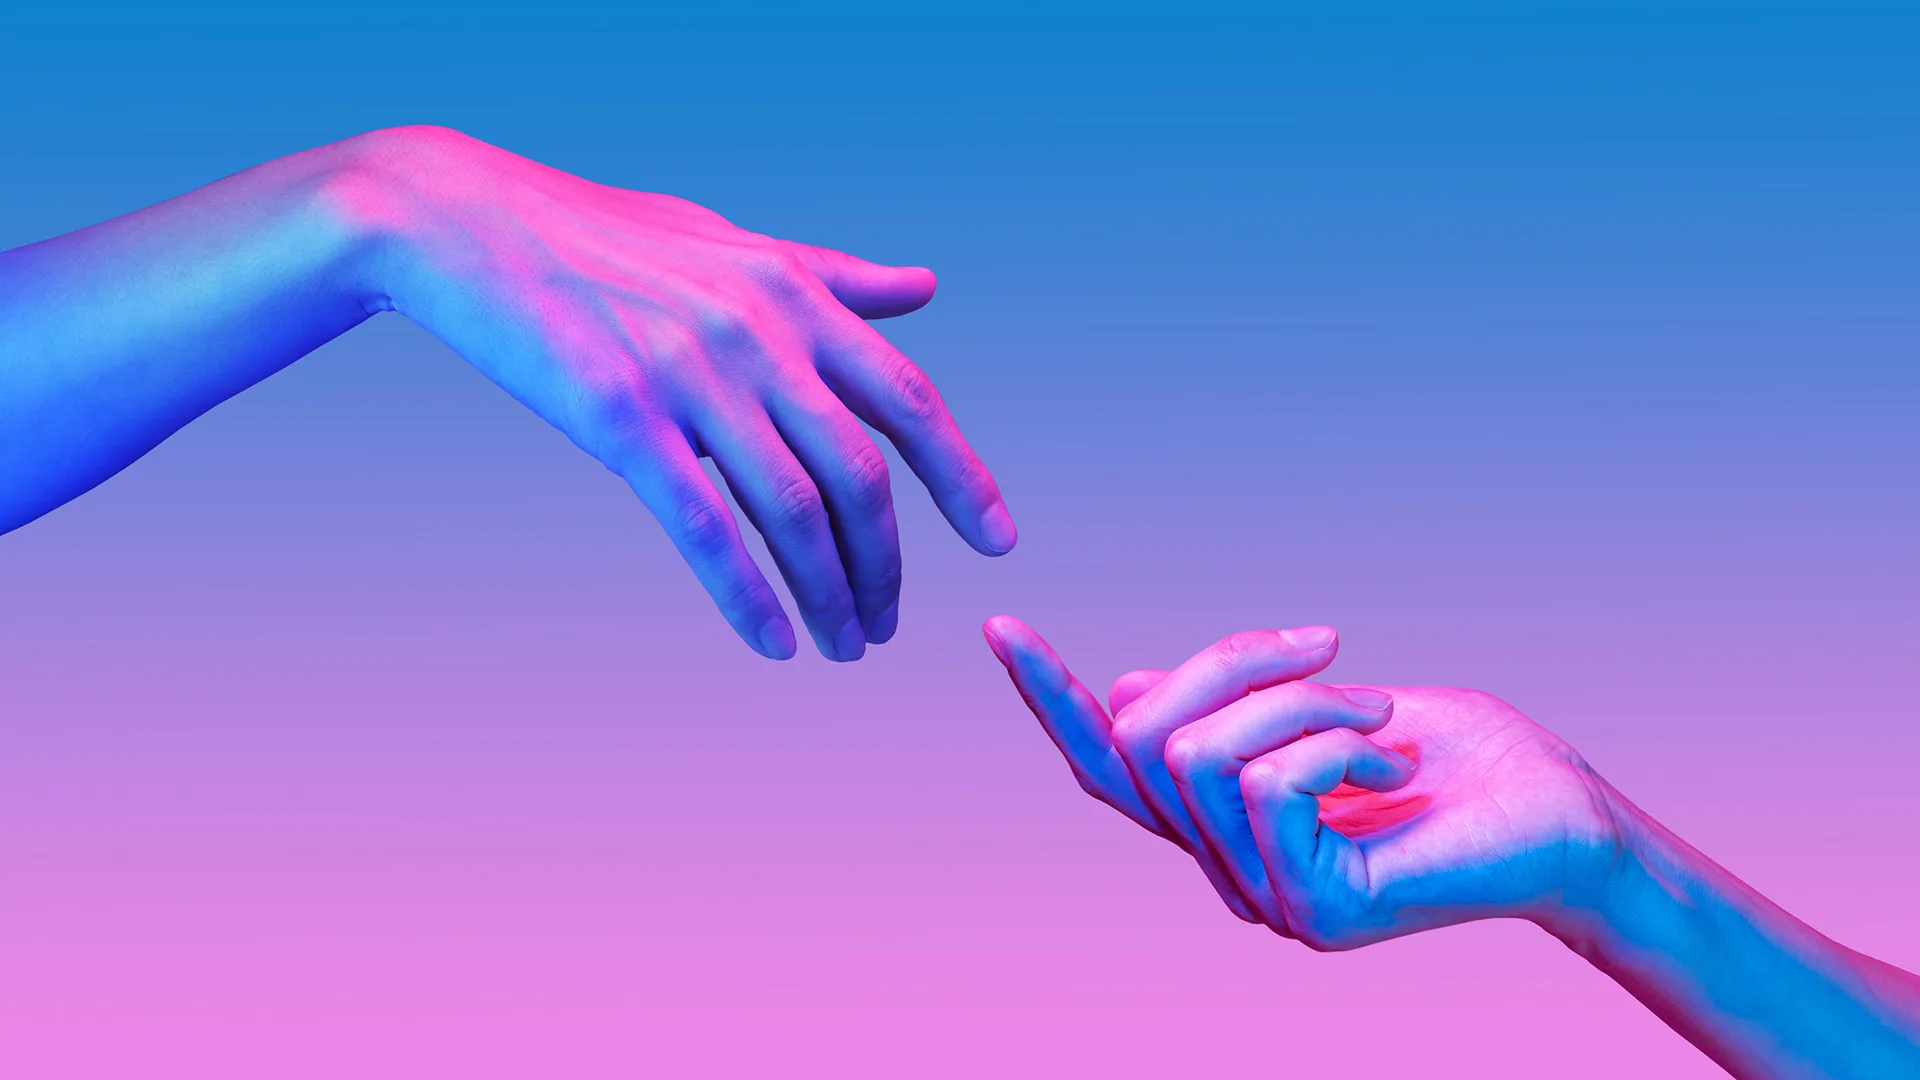 Two hands reaching towards each other in blue and pink lighting.